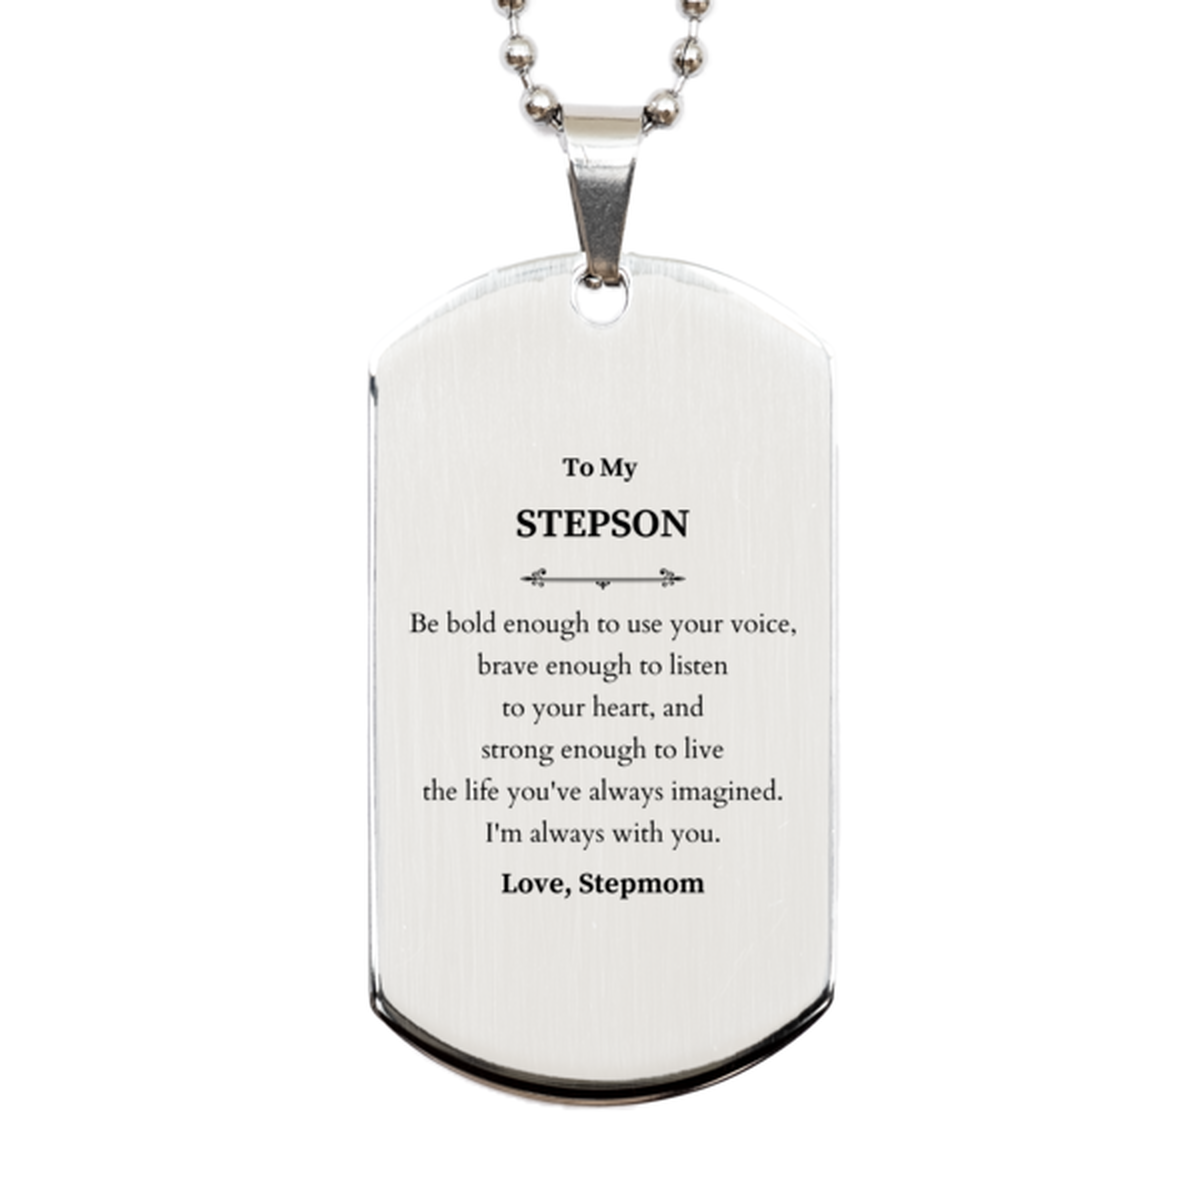 Keepsake Stepson Silver Dog Tag Gift Idea Graduation Christmas Birthday Stepson from Stepmom, Stepson Be bold enough to use your voice, brave enough to listen to your heart. Love, Stepmom